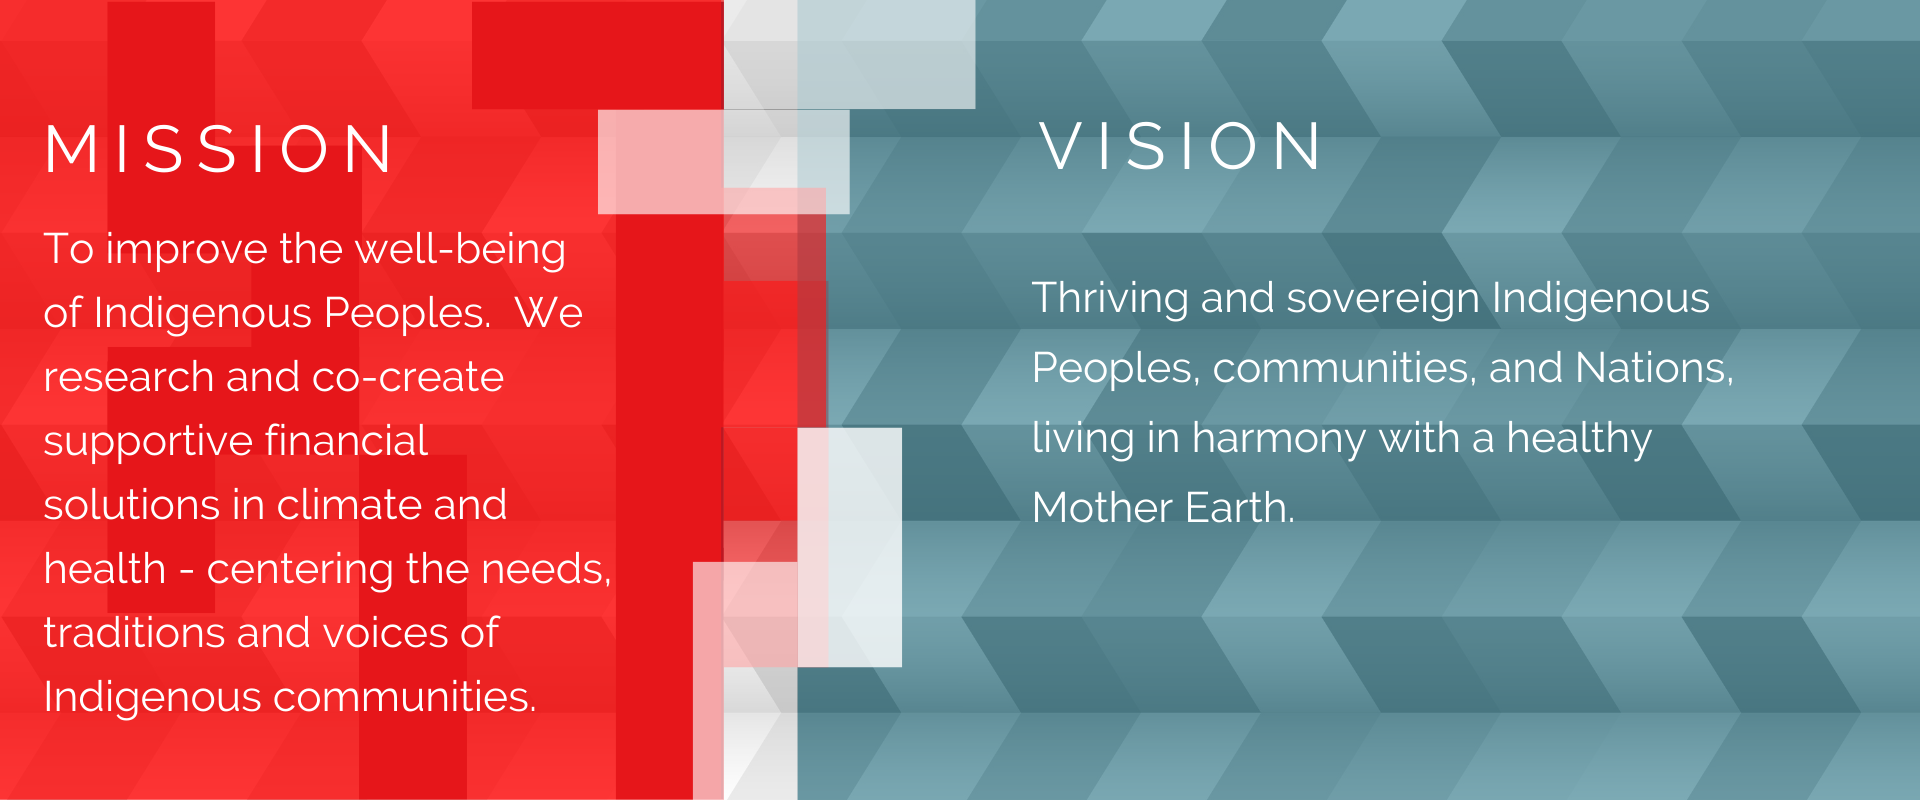 RIIF Mission and vision